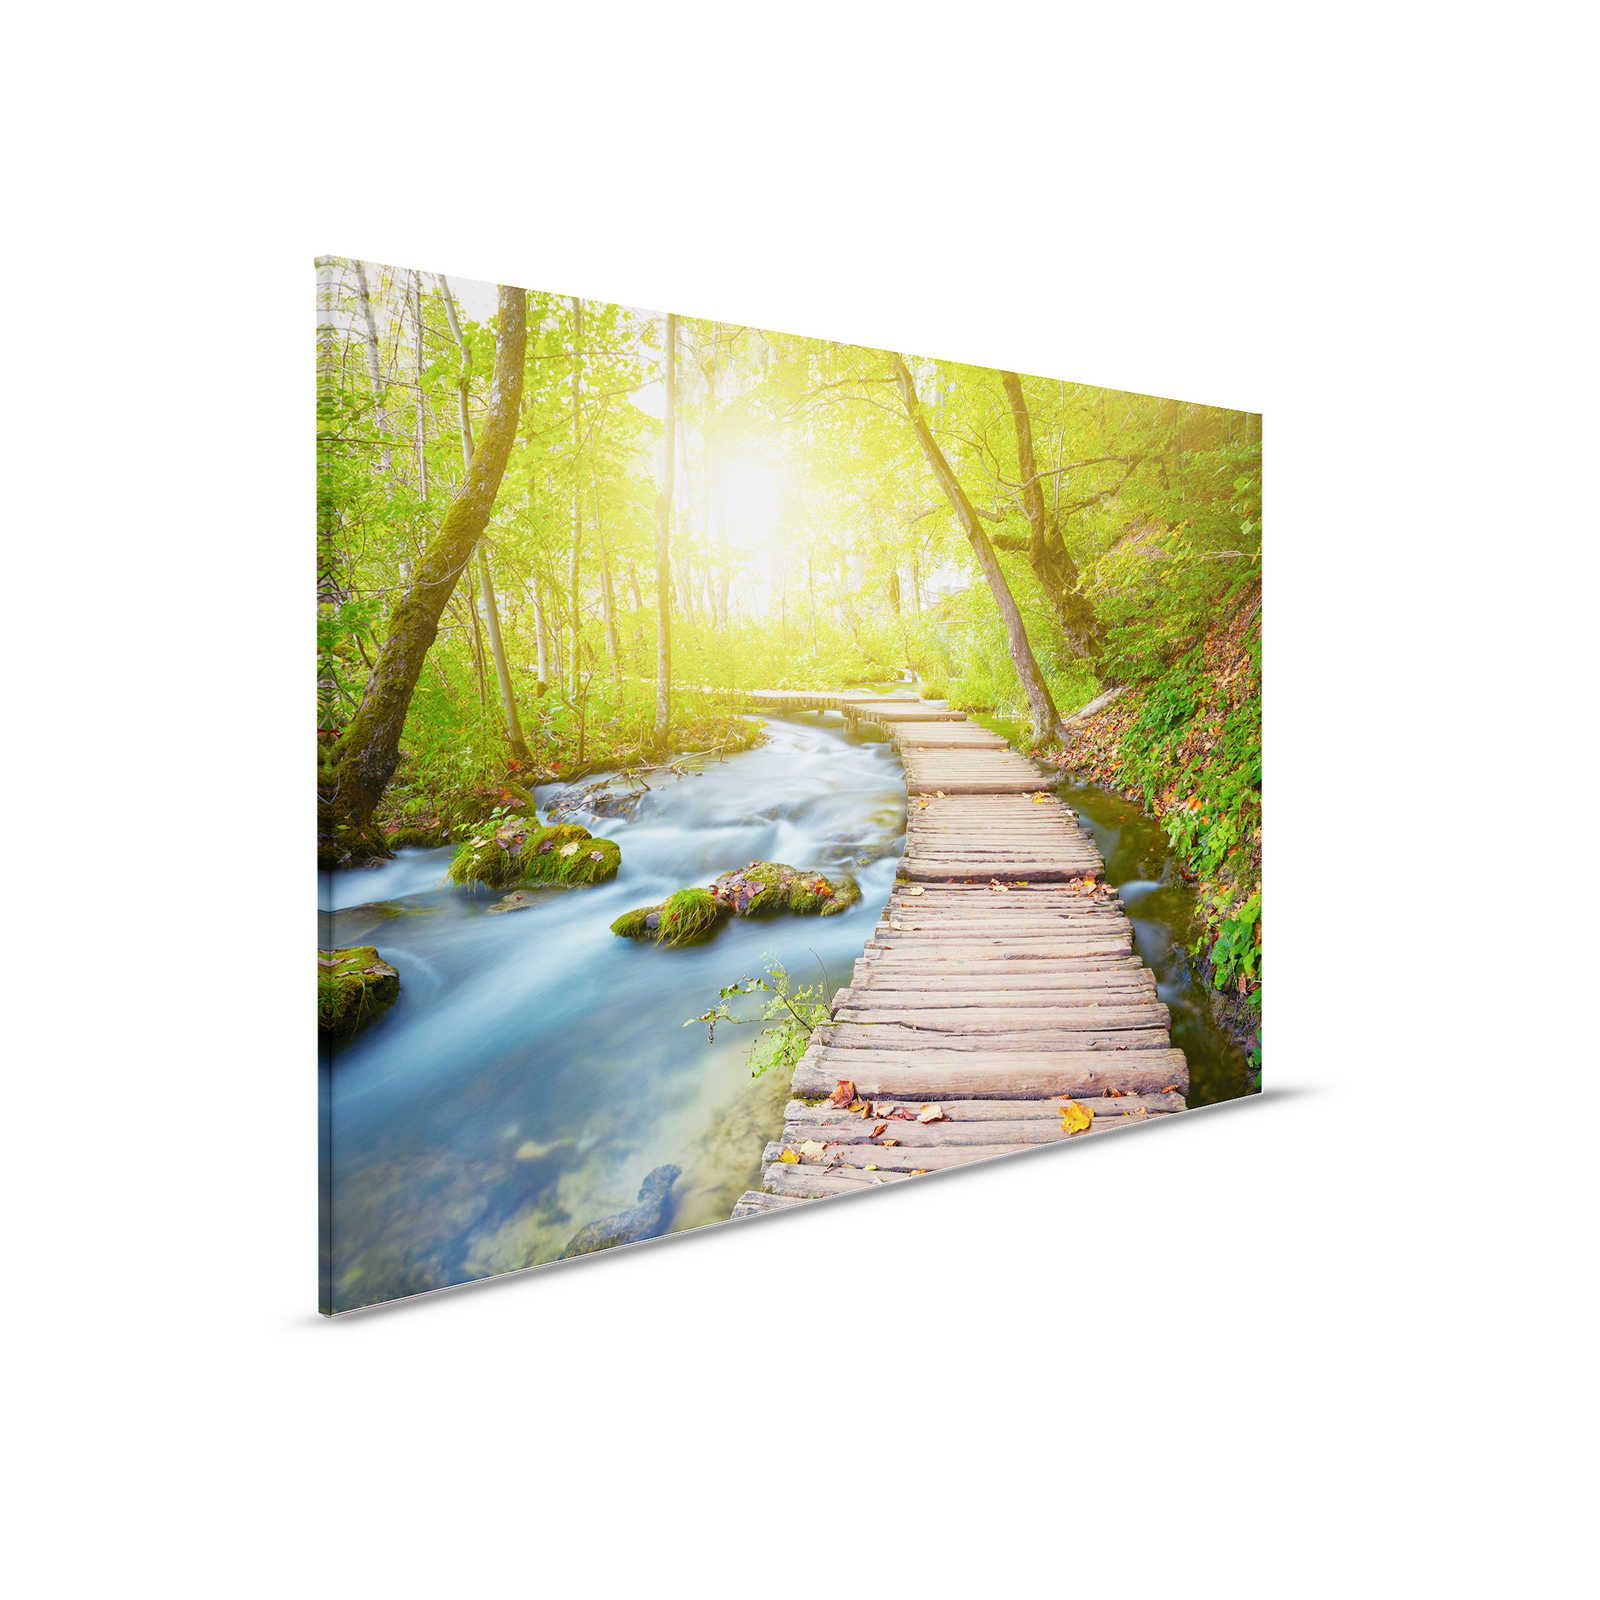         Nature Canvas painting with footbridge over river in forest - 0.90 m x 0.60 m
    